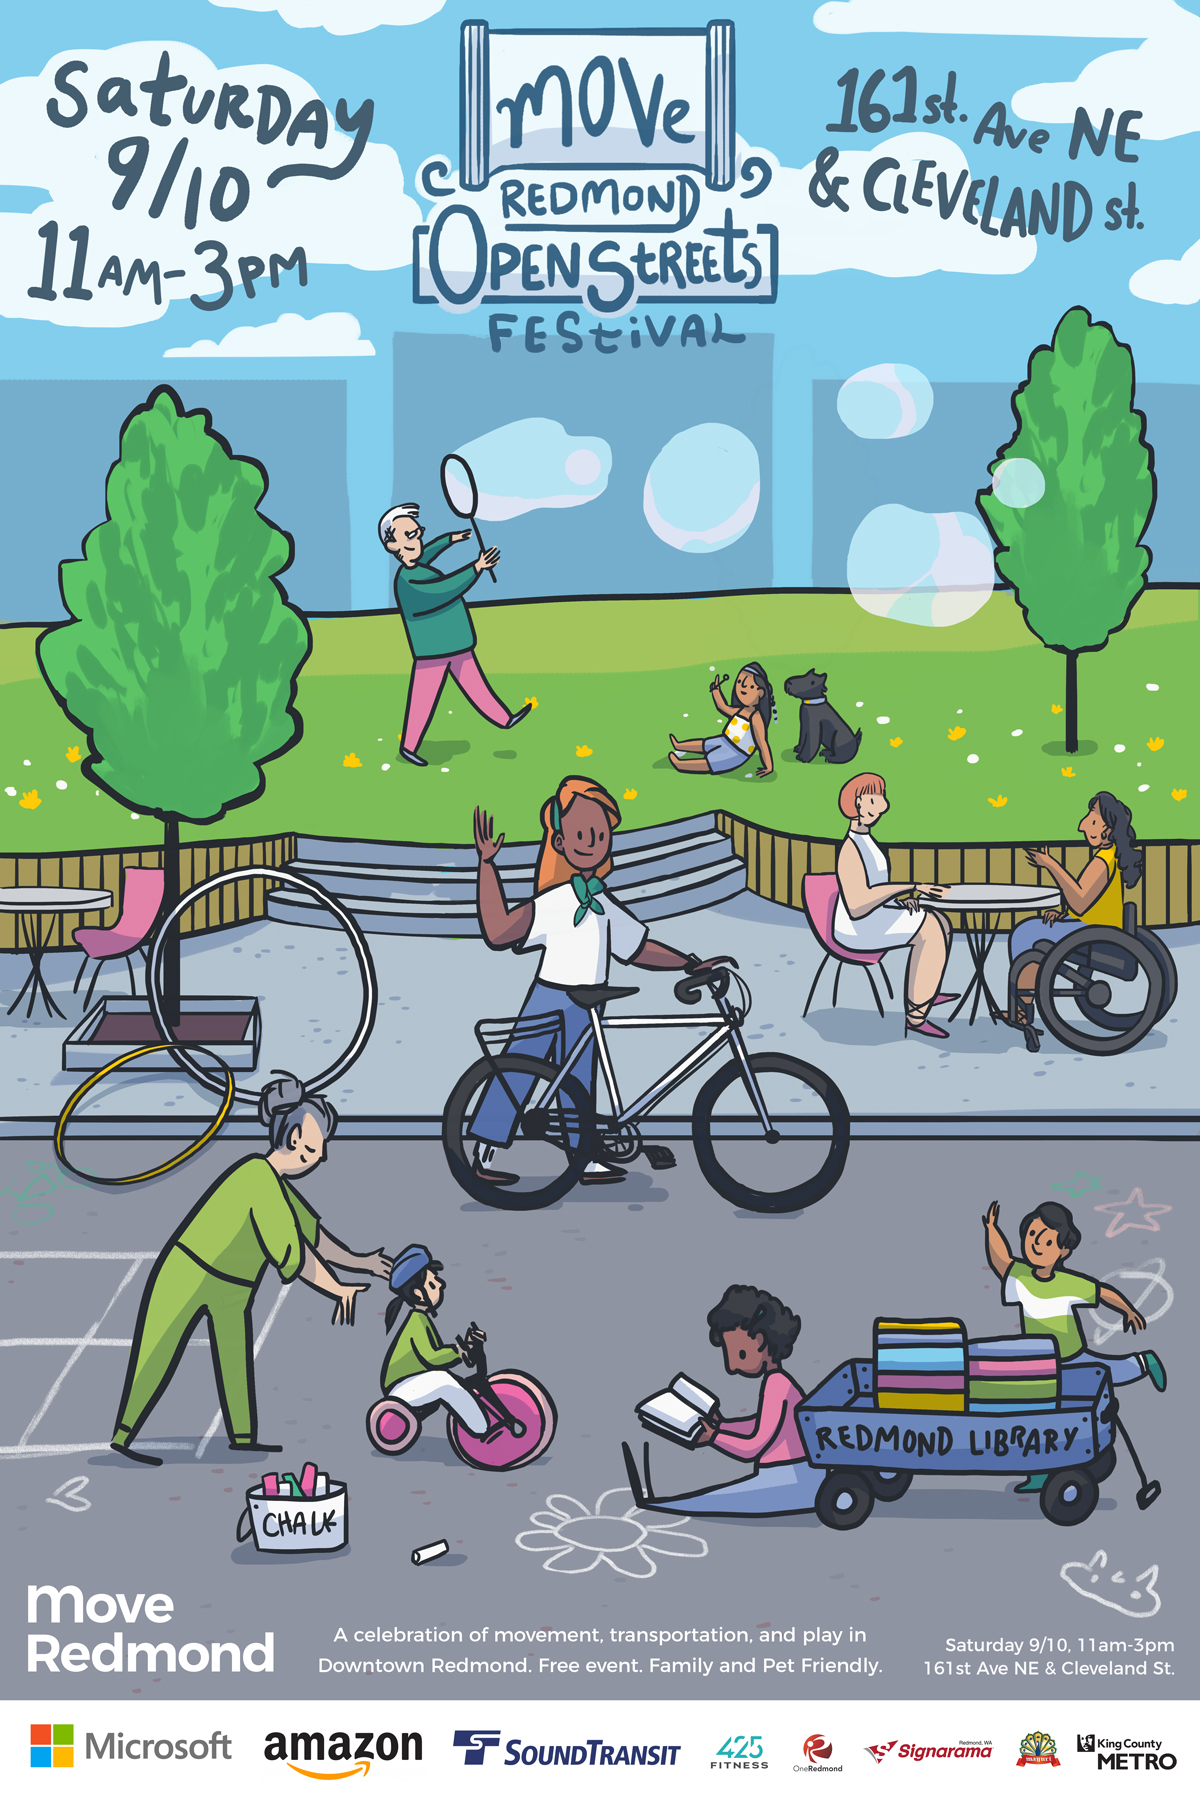 Graphic illustration of figures playing in the street, blowing bubbles, walking bikes, talking at a table sitting in a wheelchair. Move Redmond Open Streets Festival 9/10 11-3 161st and Cleveland Street